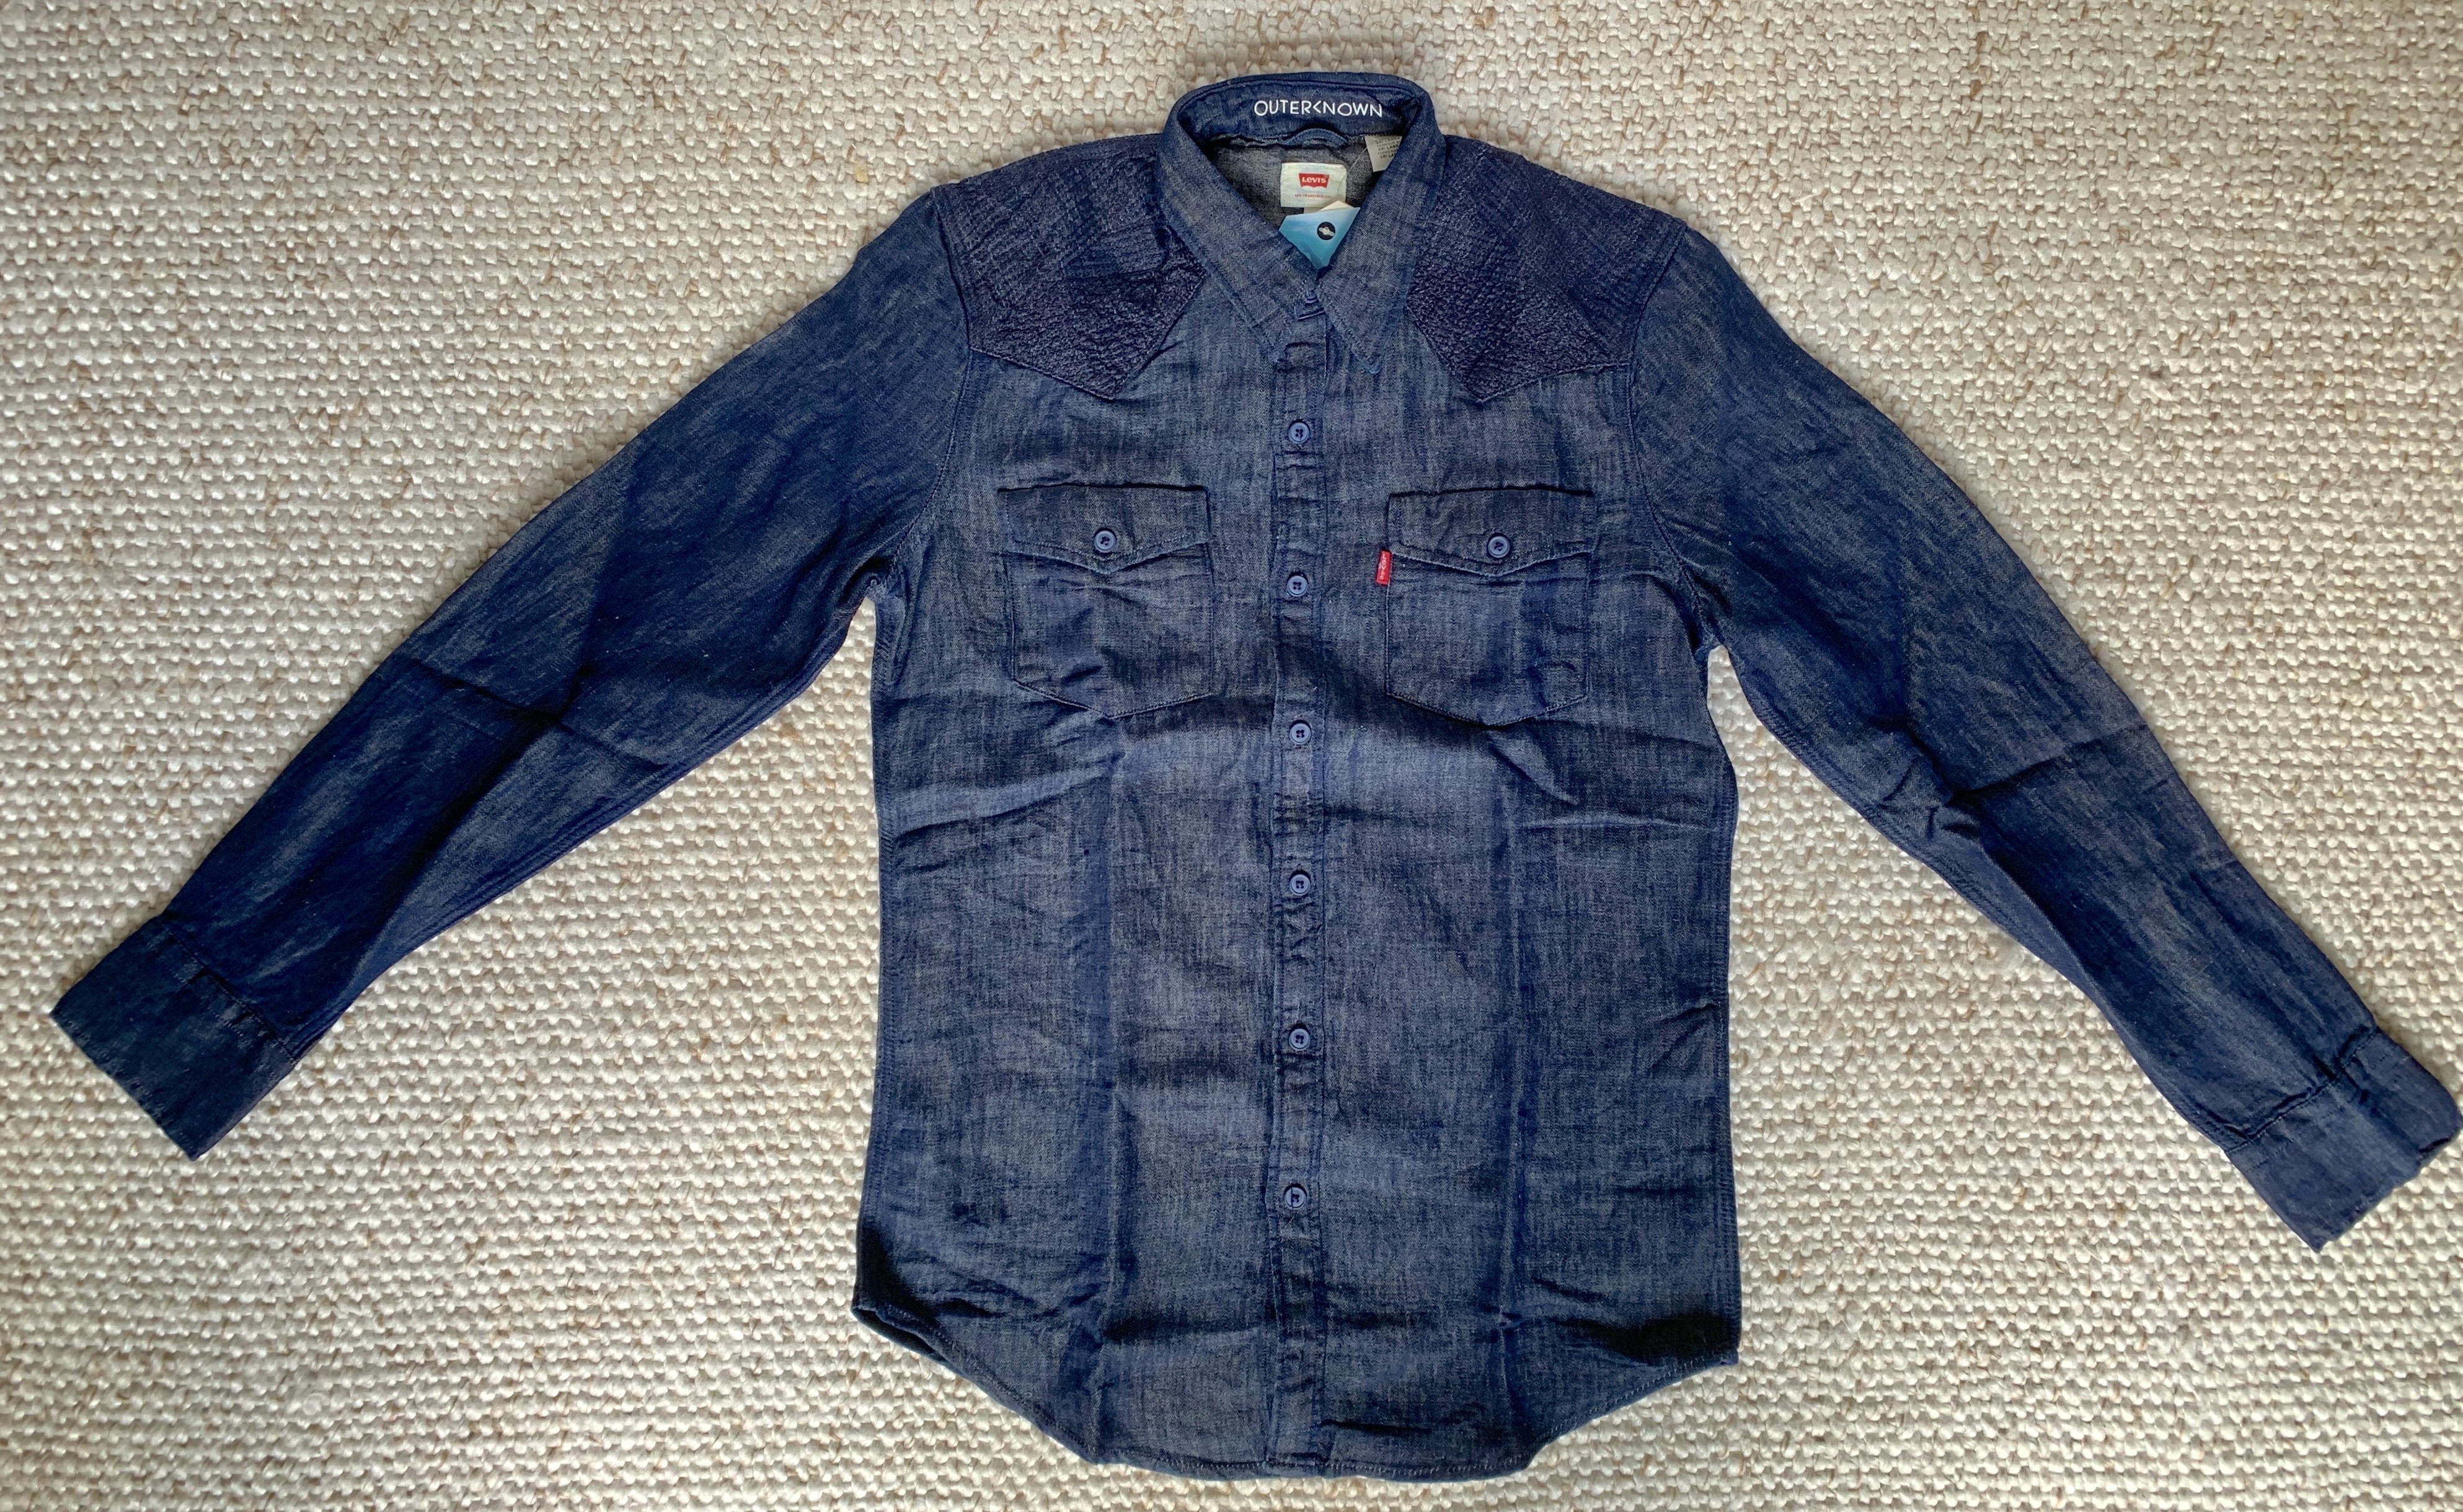 Outerknown - NWT $128 - Outerknown X Levi's Western w/ Stitched Yoke - 1